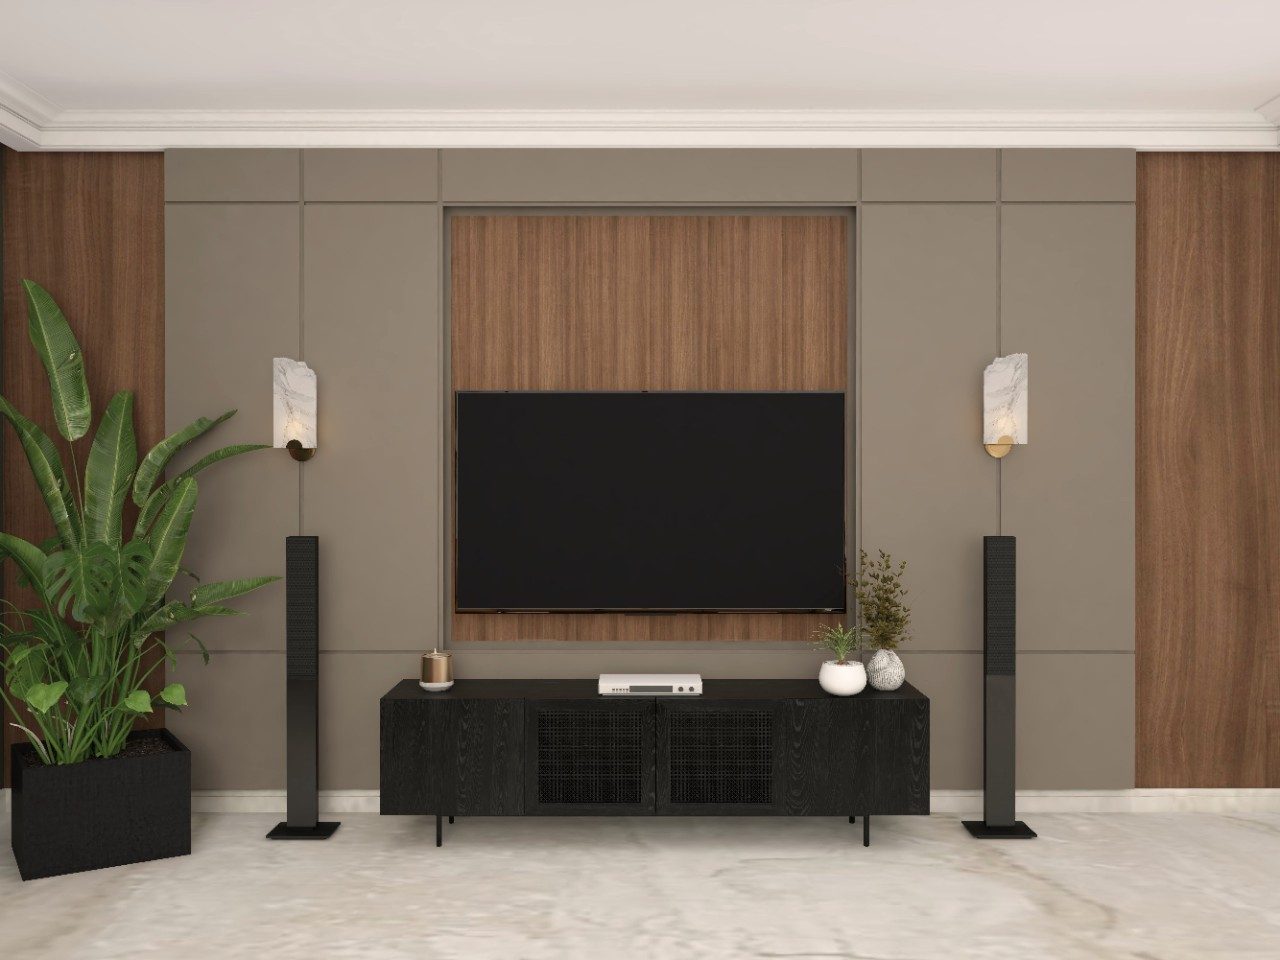 Nilaya Luxe TV unit with wooden wall paneling - Beautiful Homes